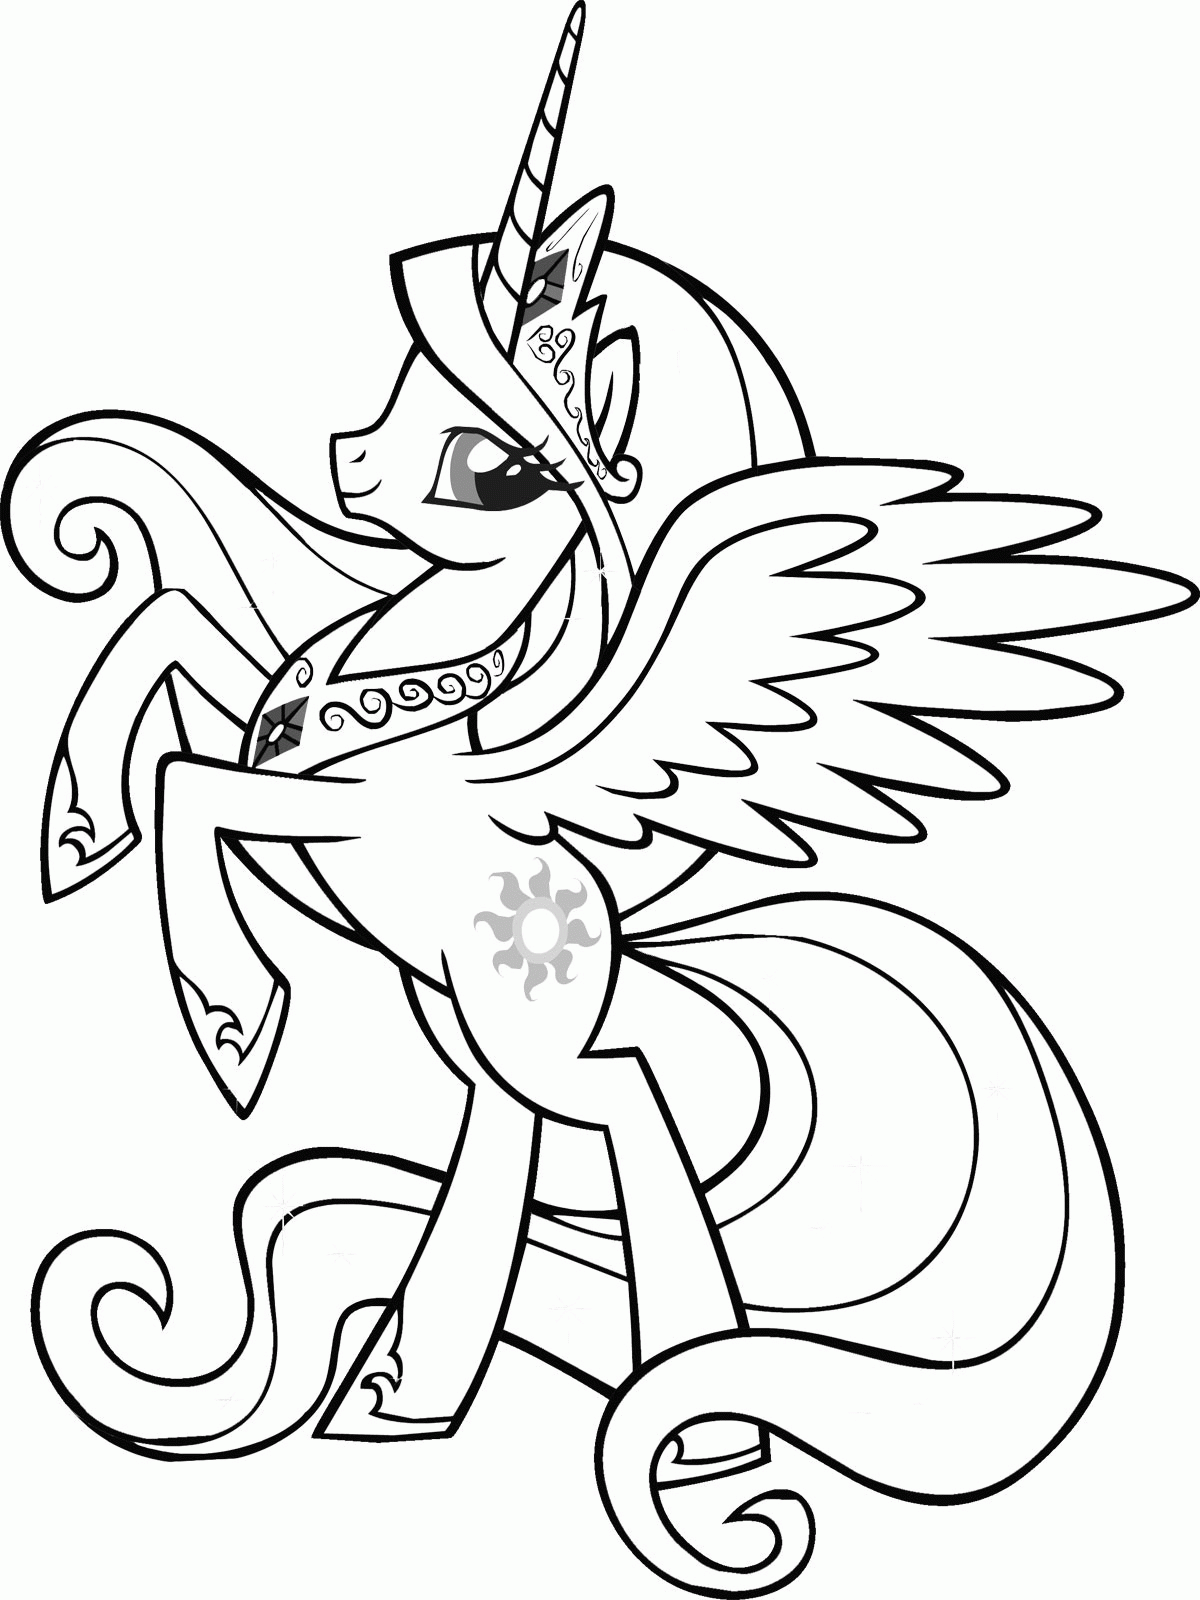 Pony To Color - Coloring Pages for Kids and for Adults